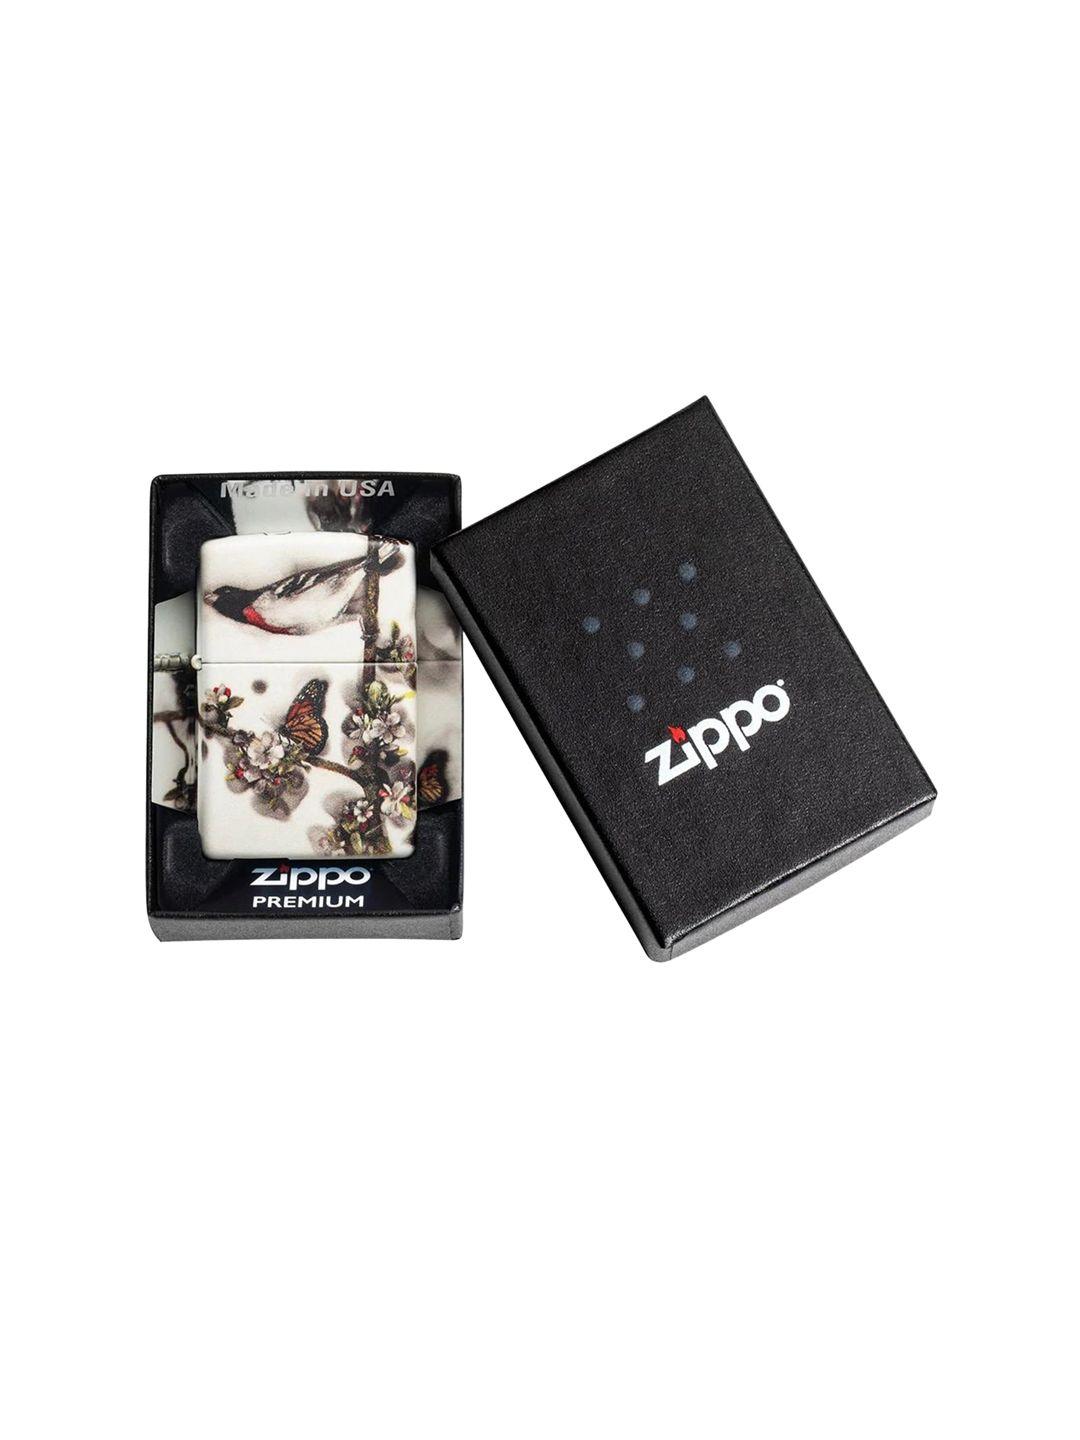 zippo white & brown floral printed windproof pocket lighter